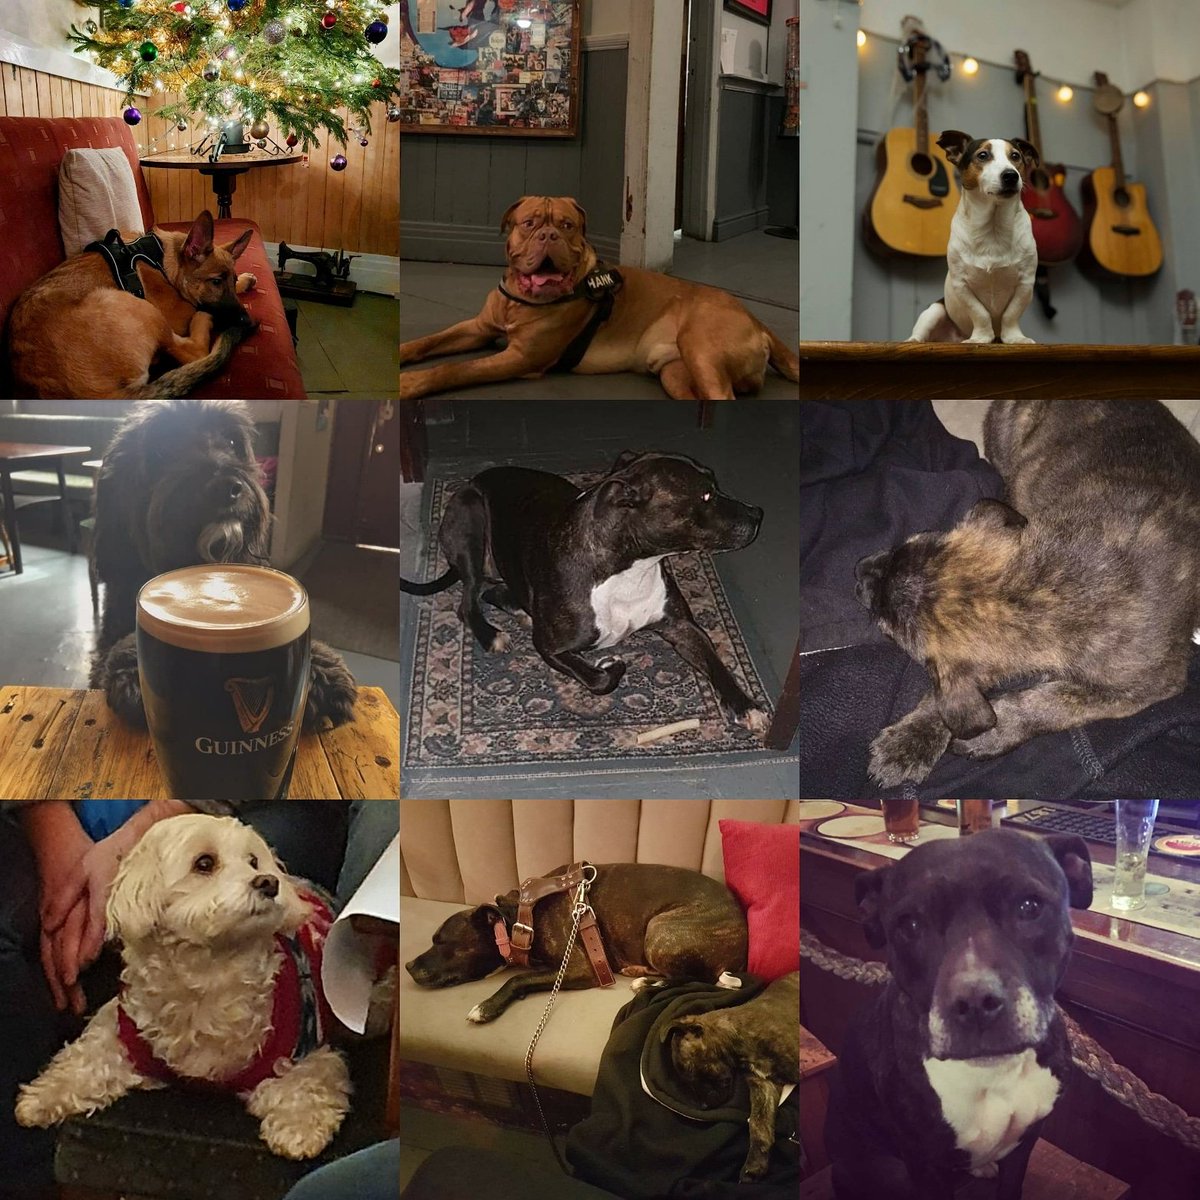 Happy Thursday!! We thought we'd show some appreciation for some of our furry customers🤣 If you've got any pics of your pups in our pub share them with us!!🐾
#dogfriendly #destinationbootle #lockandquaybootle